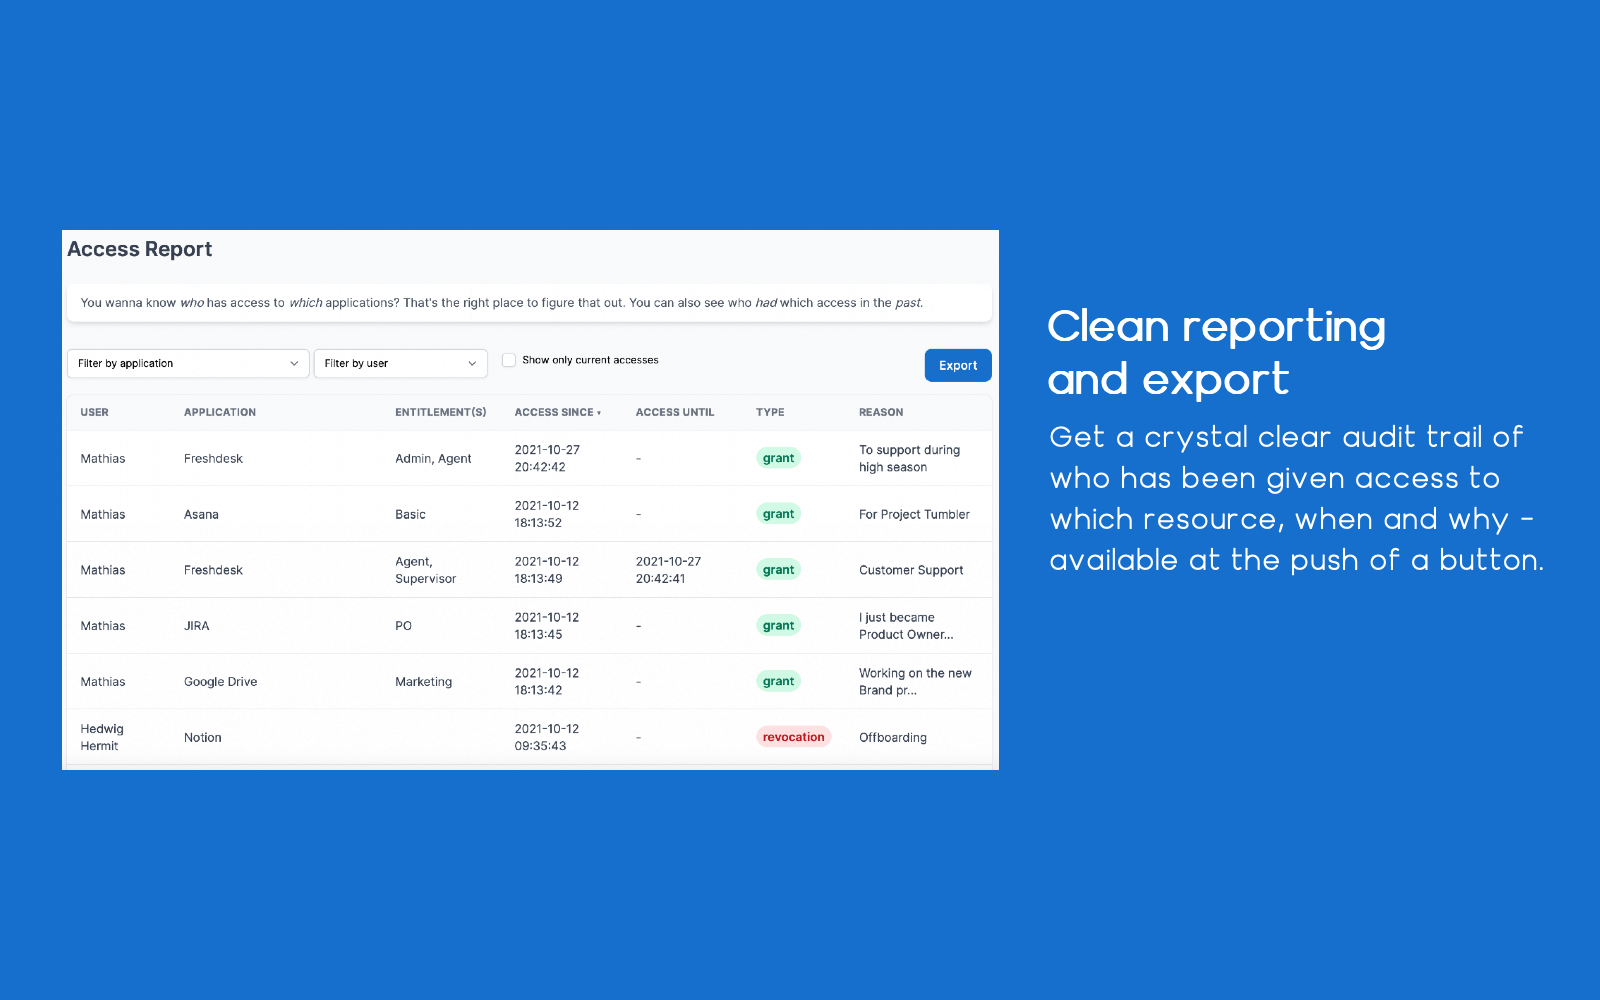 Clean reporting and export